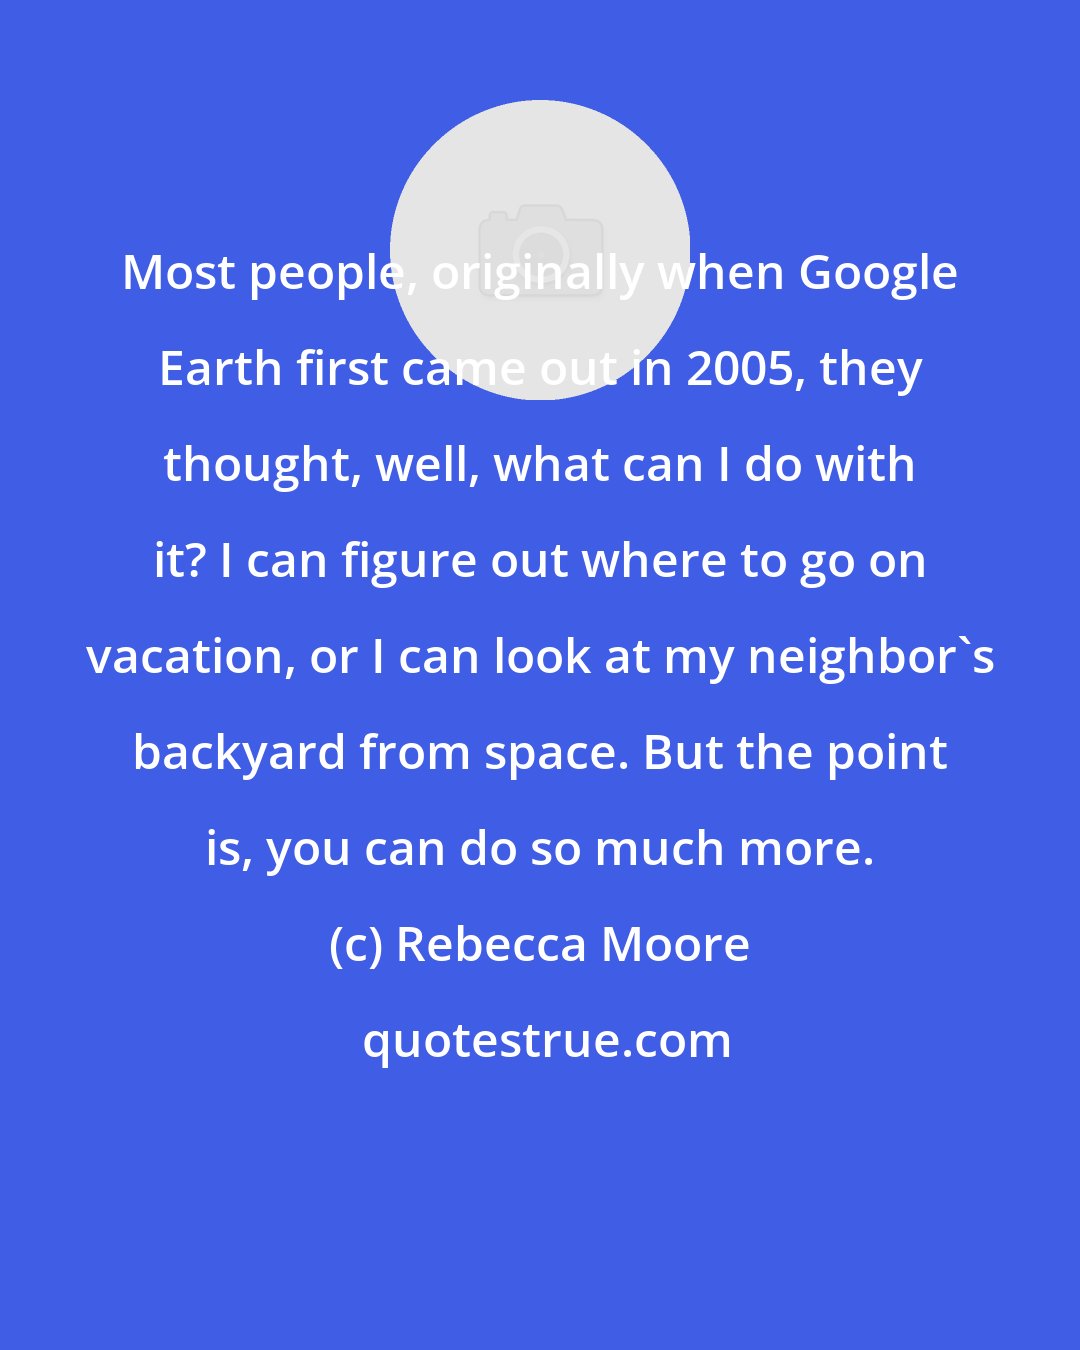 Rebecca Moore: Most people, originally when Google Earth first came out in 2005, they thought, well, what can I do with it? I can figure out where to go on vacation, or I can look at my neighbor's backyard from space. But the point is, you can do so much more.